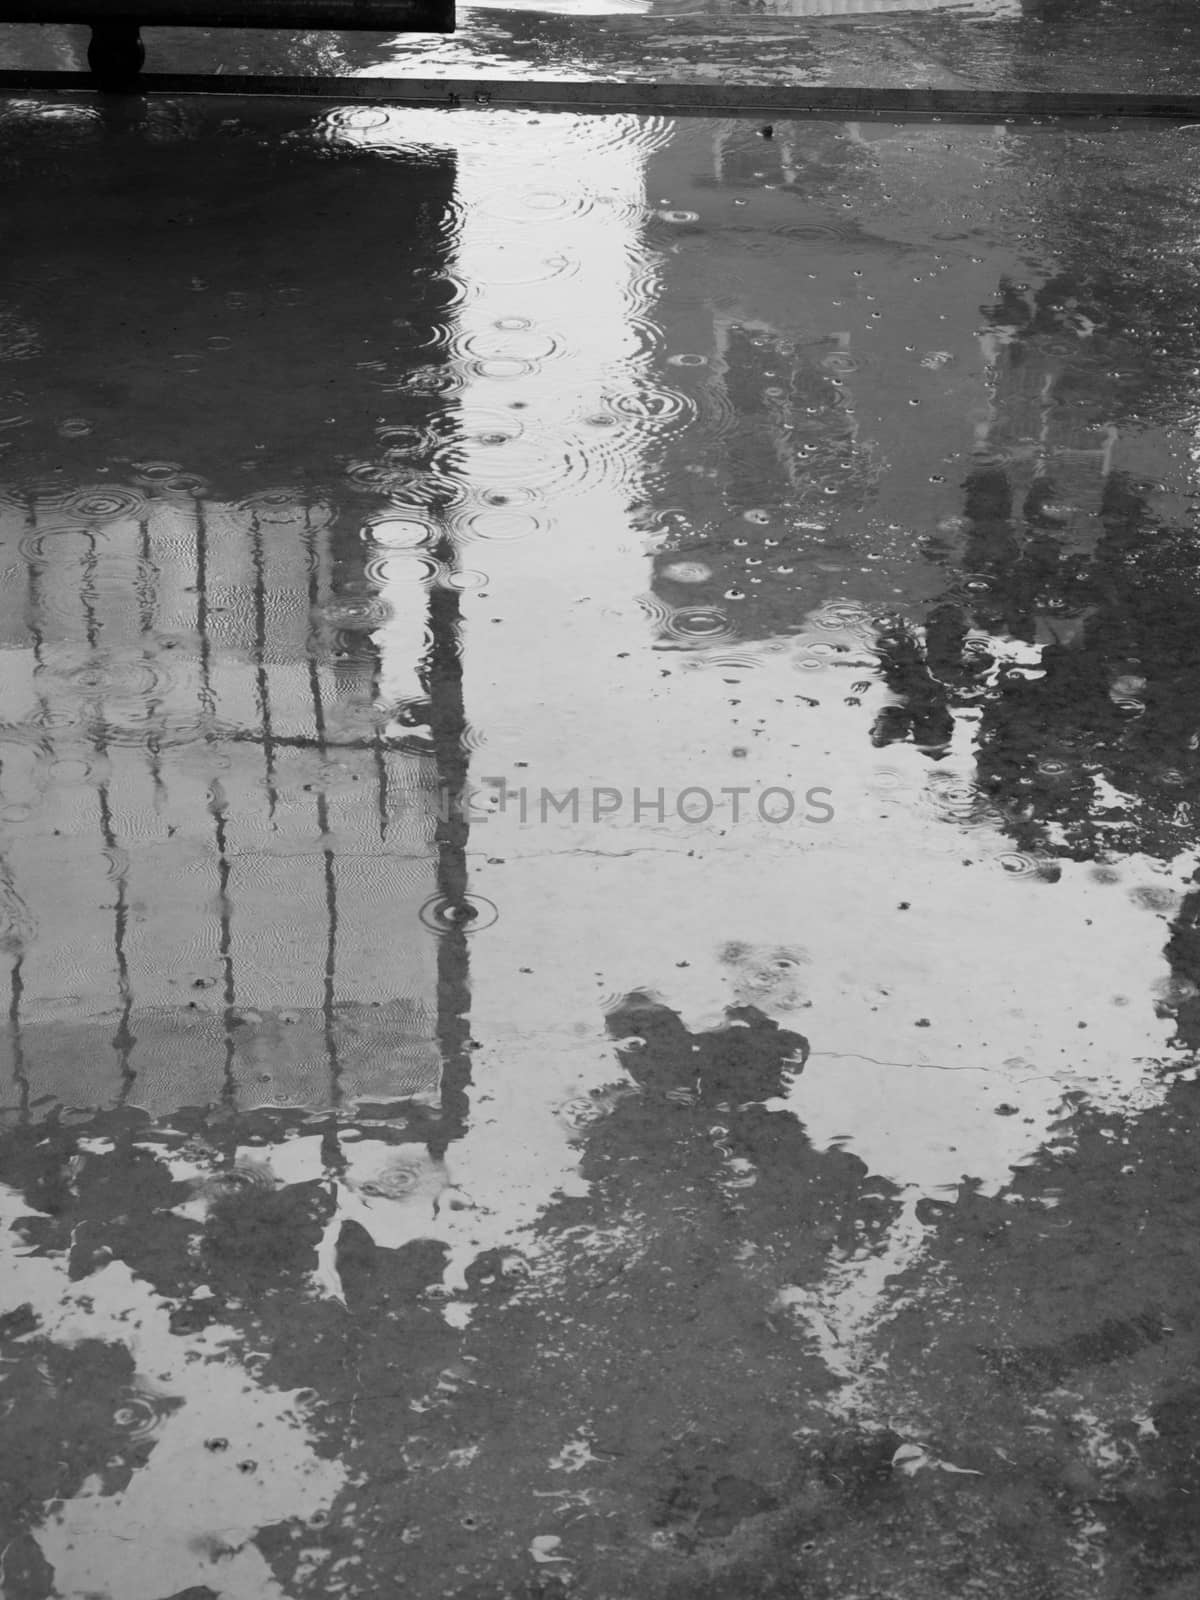 PHOTO OF RAINDROPS AND REFLECTION by PrettyTG